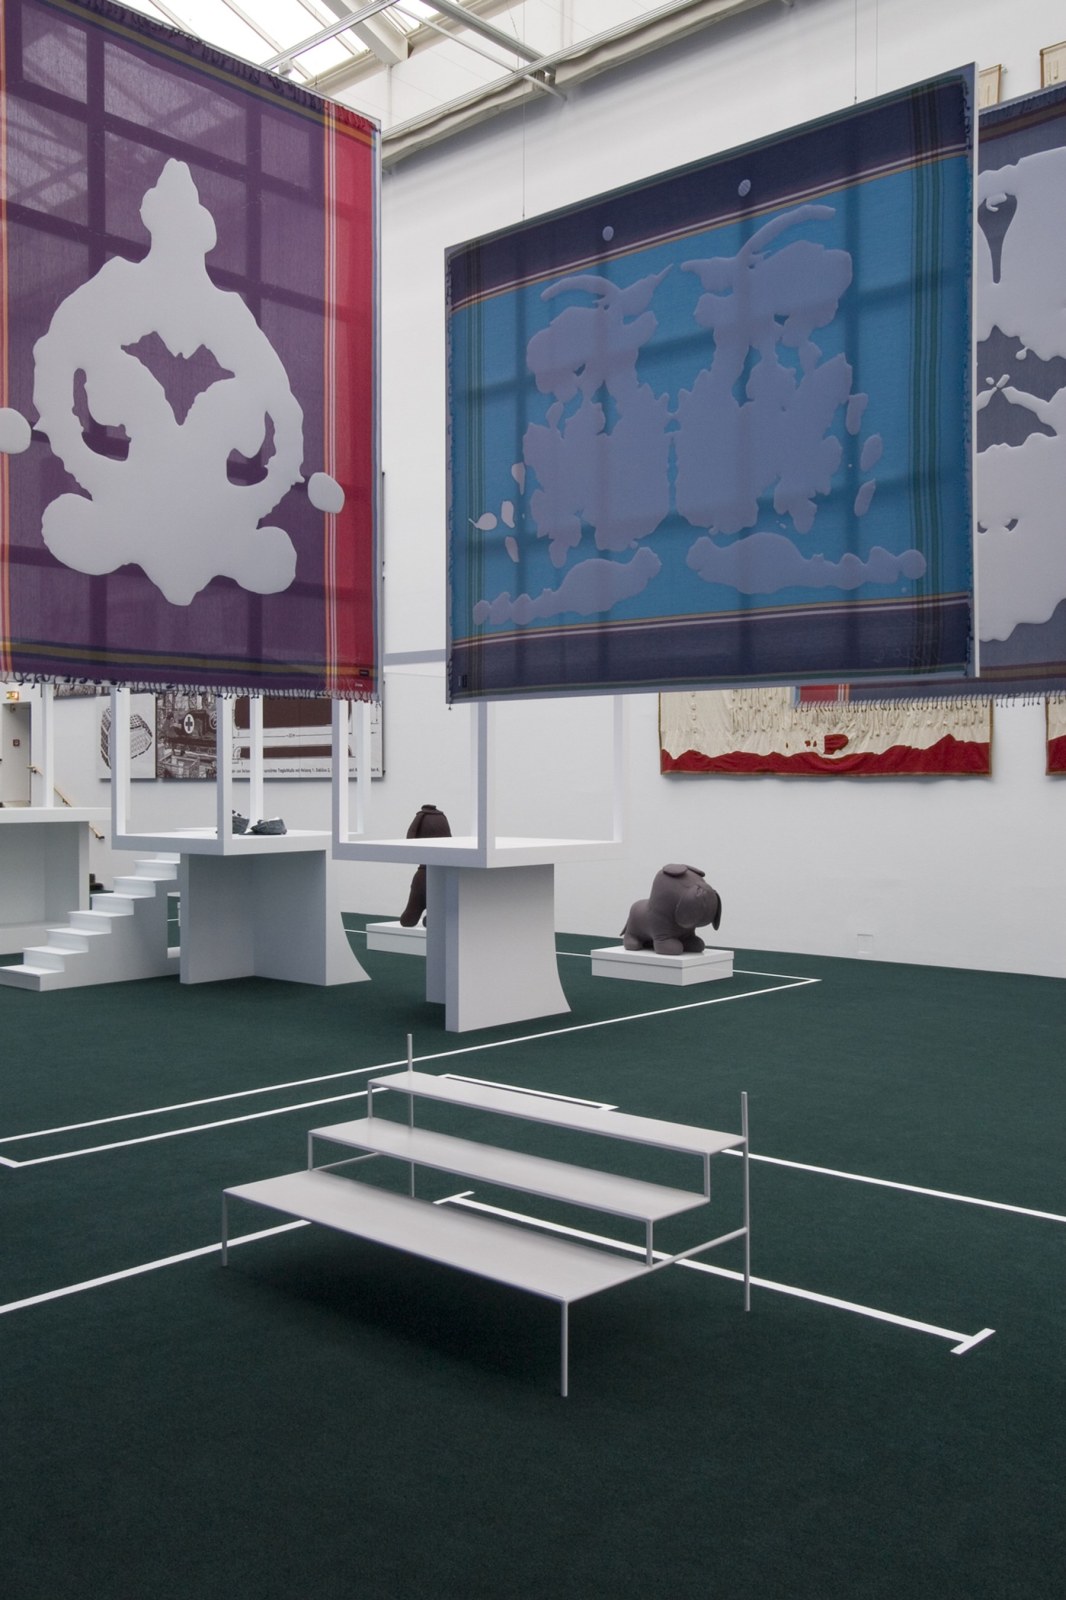 Installation view from documenta 12 featuring two of von Bonin's rorschach test fabric paintings. One is pink and purple with the white rorschach blob appliqu&eacute;d on, and the second is light and dark blue with the white rorscah test appliqu&eacute;d on. The paintings are hanging from the ceiling, below them are small white bleachers and in the background are white cubes on platforms and a large gray stuffec bulldog on a white platform.